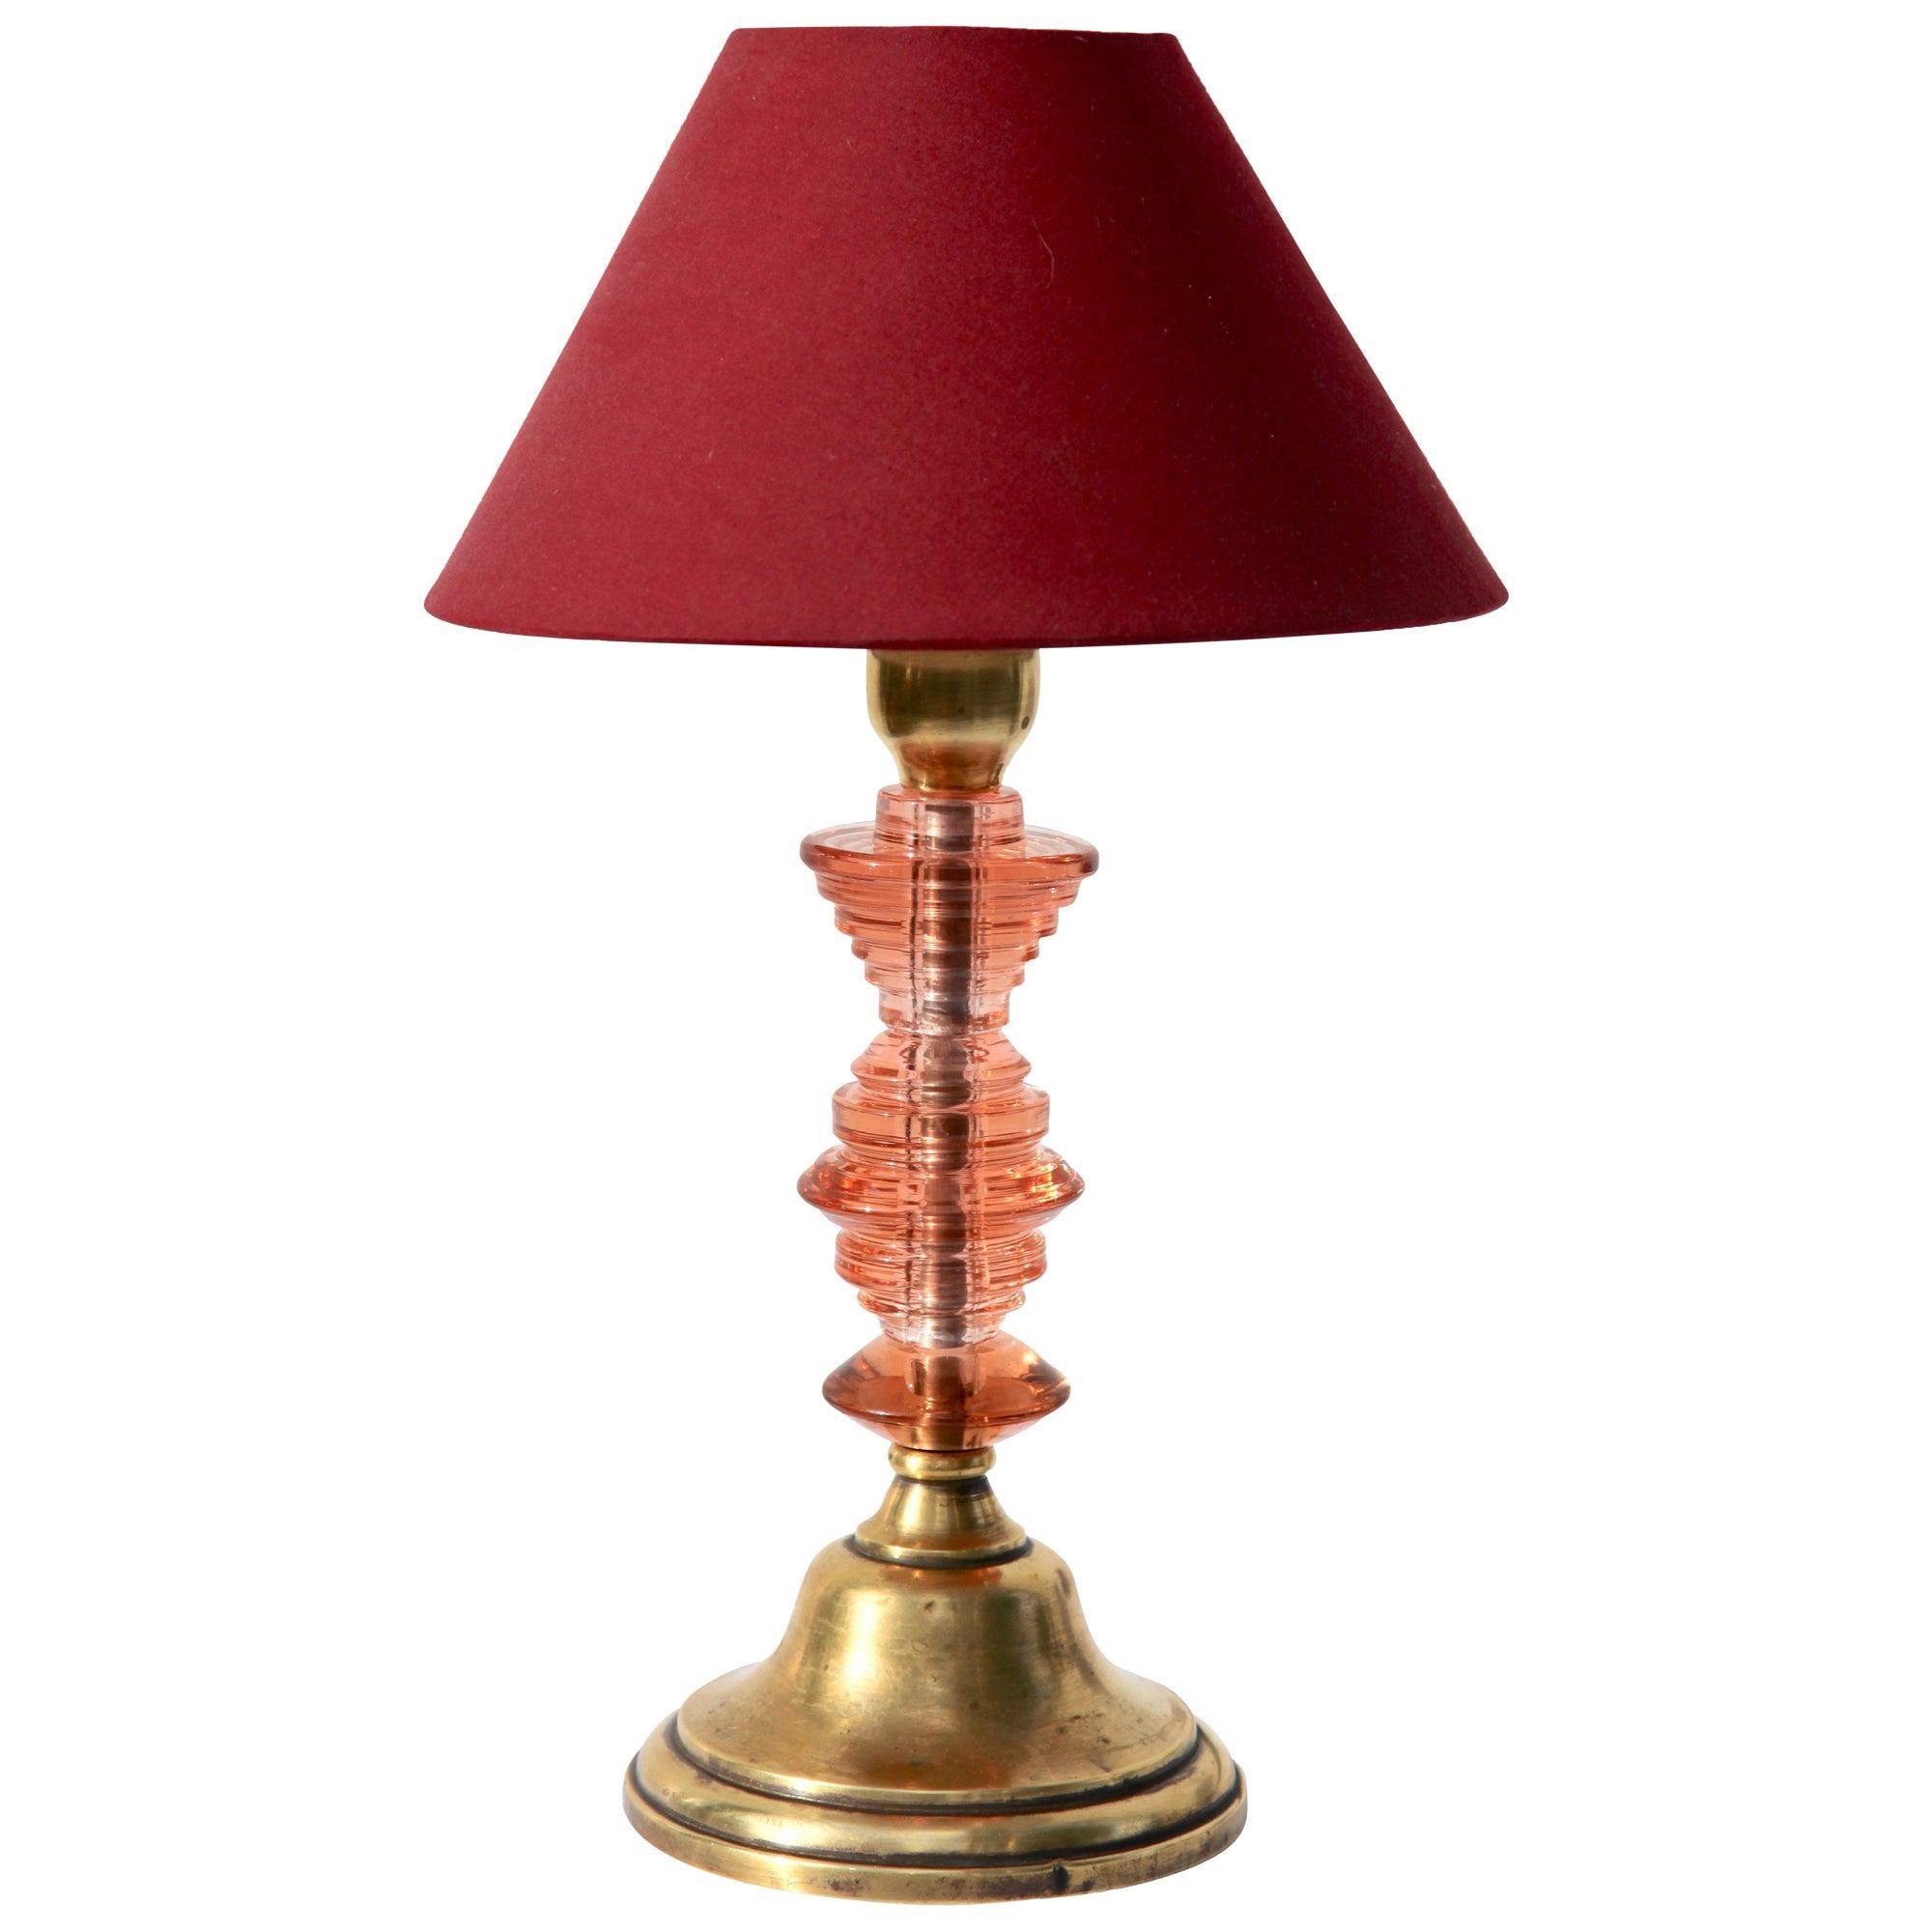 Art Deco Table Lamp in Colored Glass and with Brass Details, 1935 For Sale